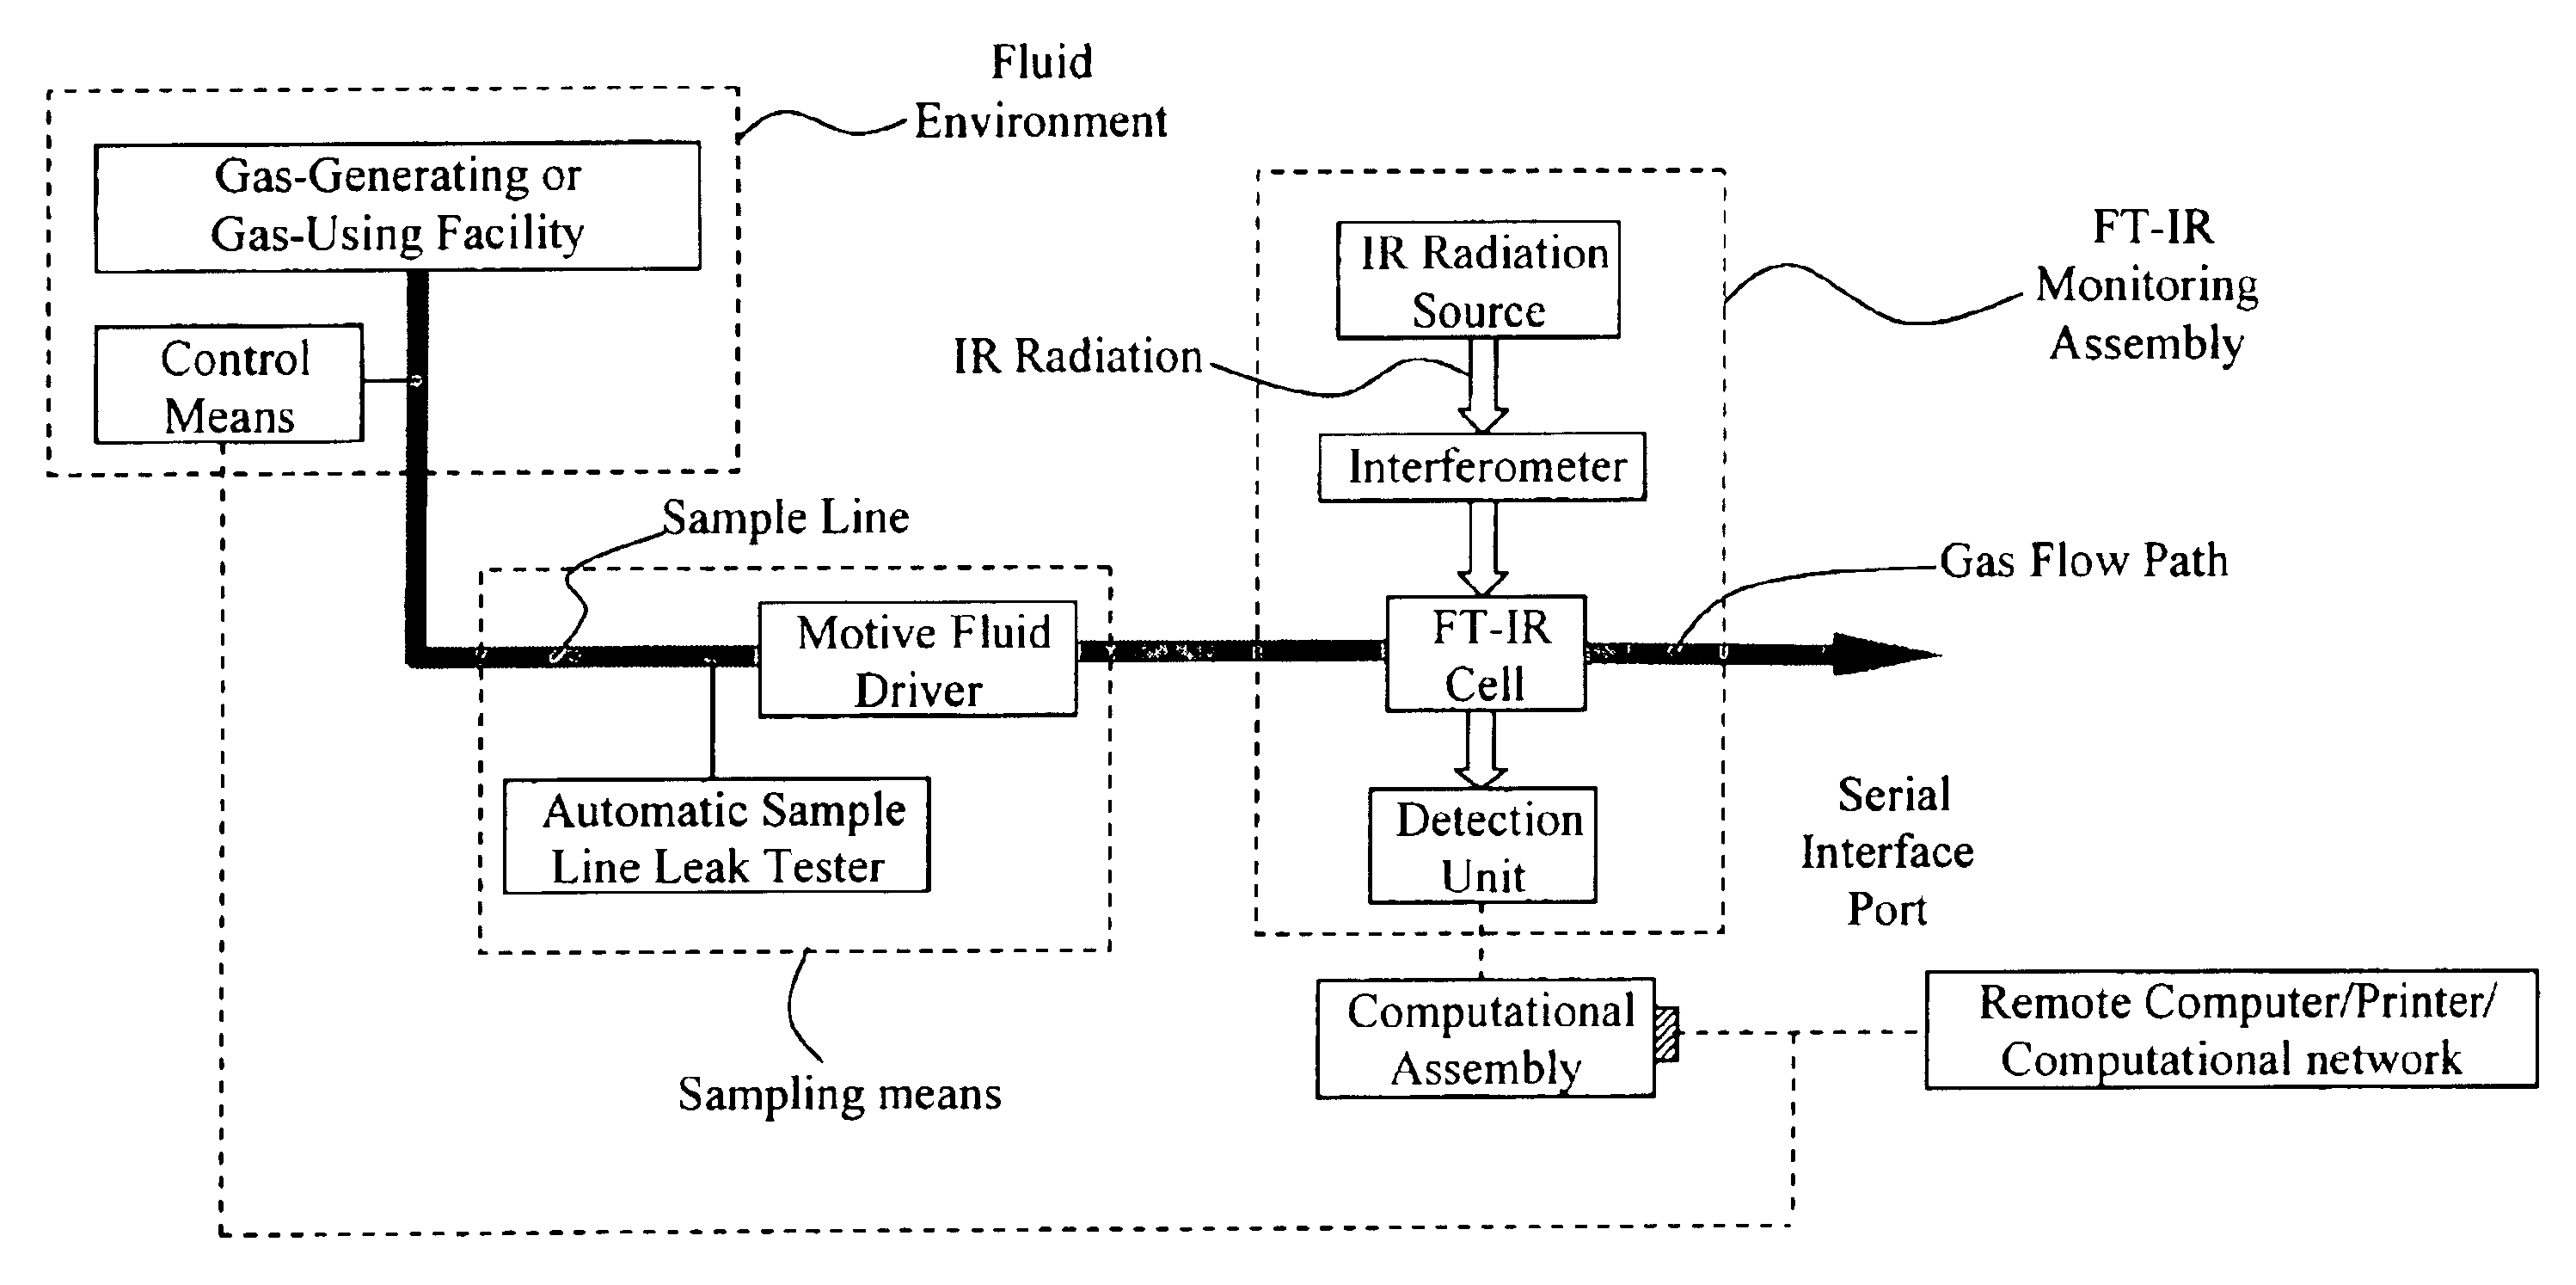 Fourier transform infrared (FTIR) spectrometric toxic gas monitoring system, and method of detecting toxic gas species in a fluid environment containing or susceptible to the presence of such toxic gas species